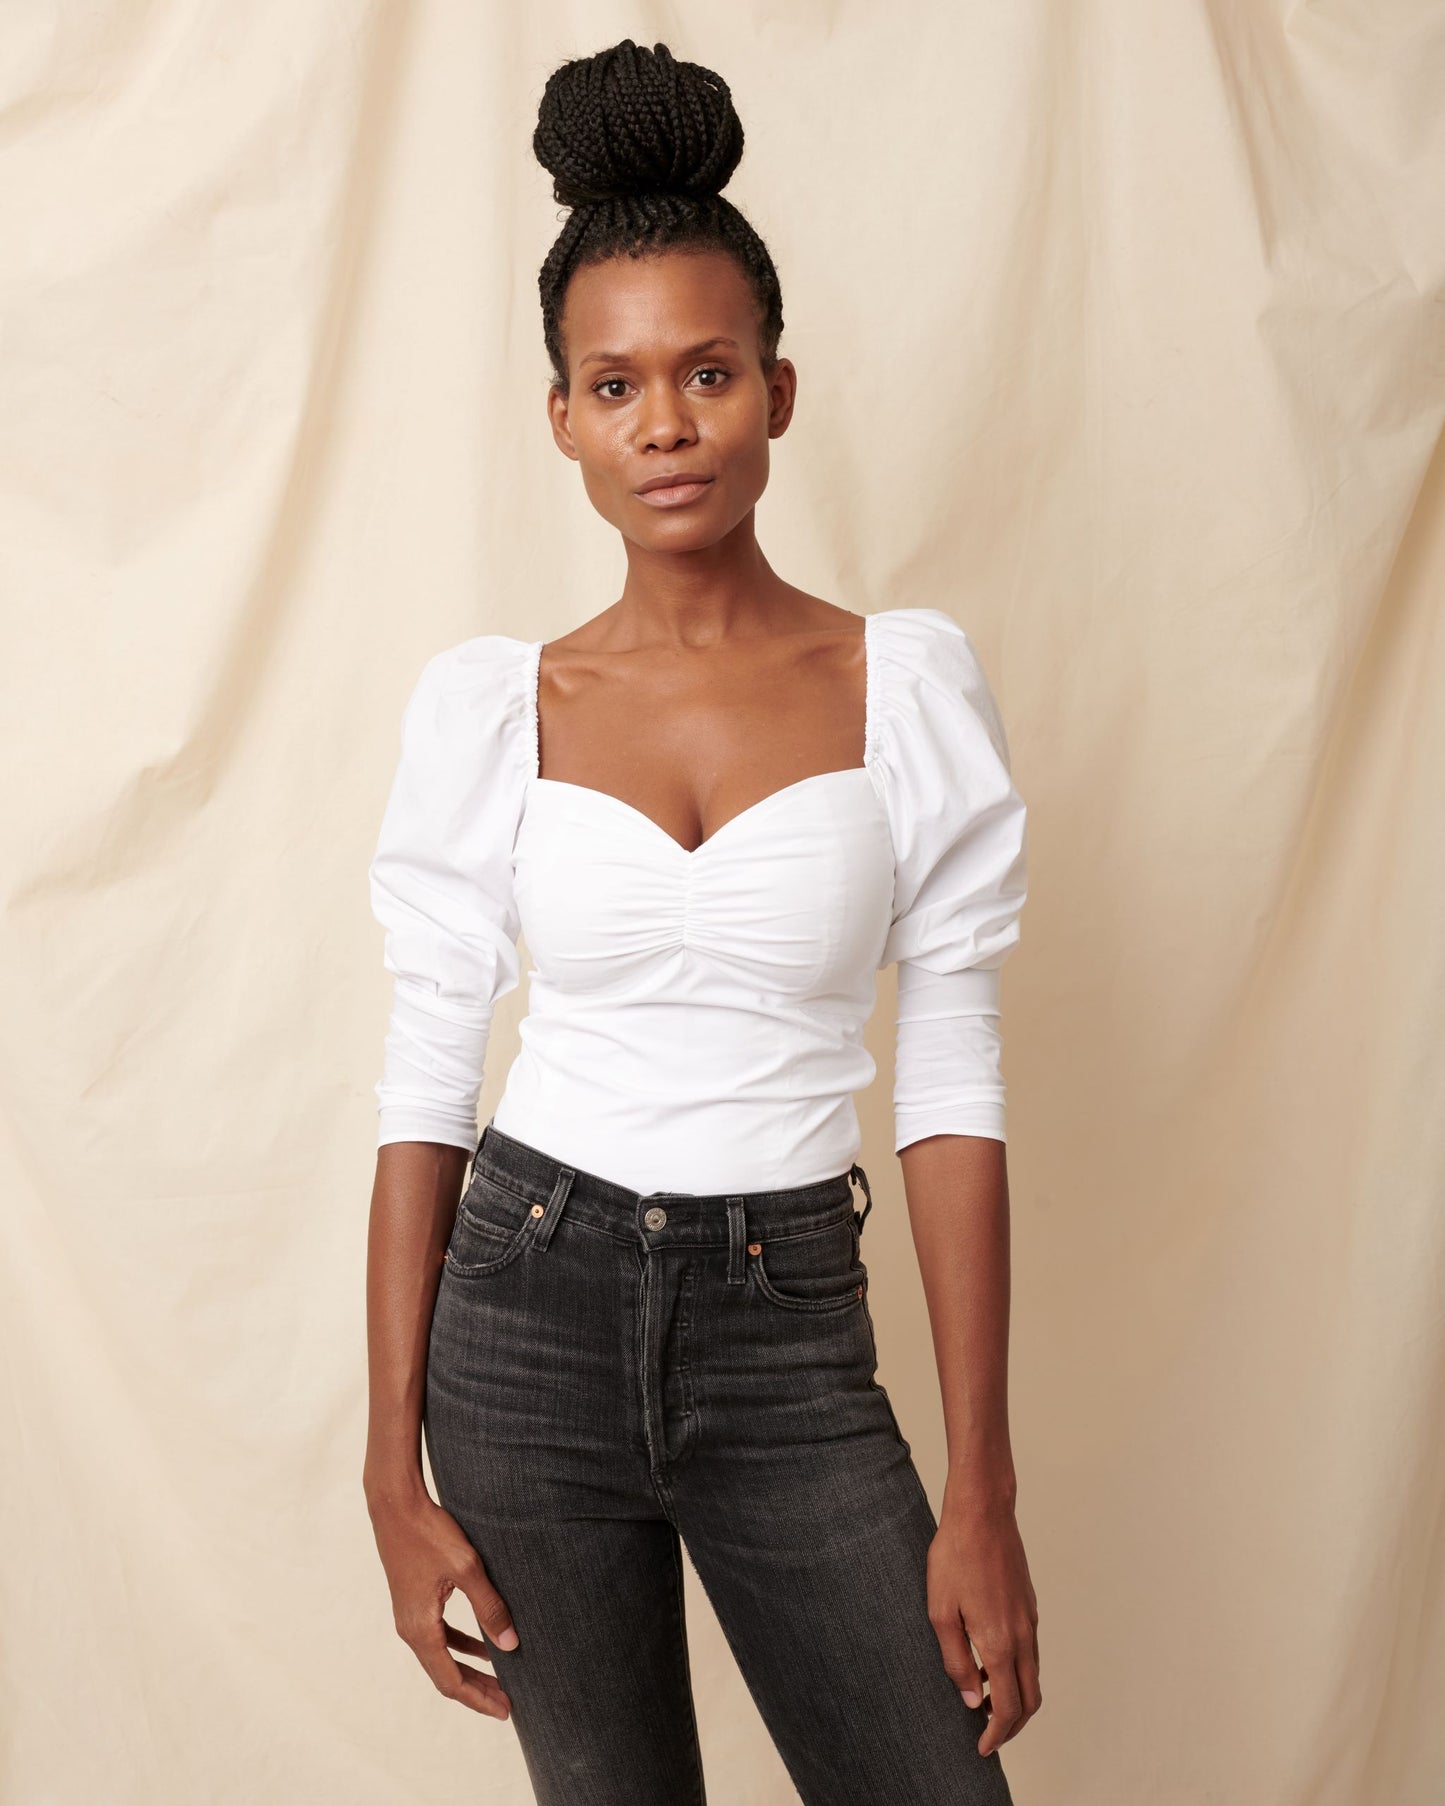 White cotton top with sweetheart neckline on black model wearing black jeans and hair in bun